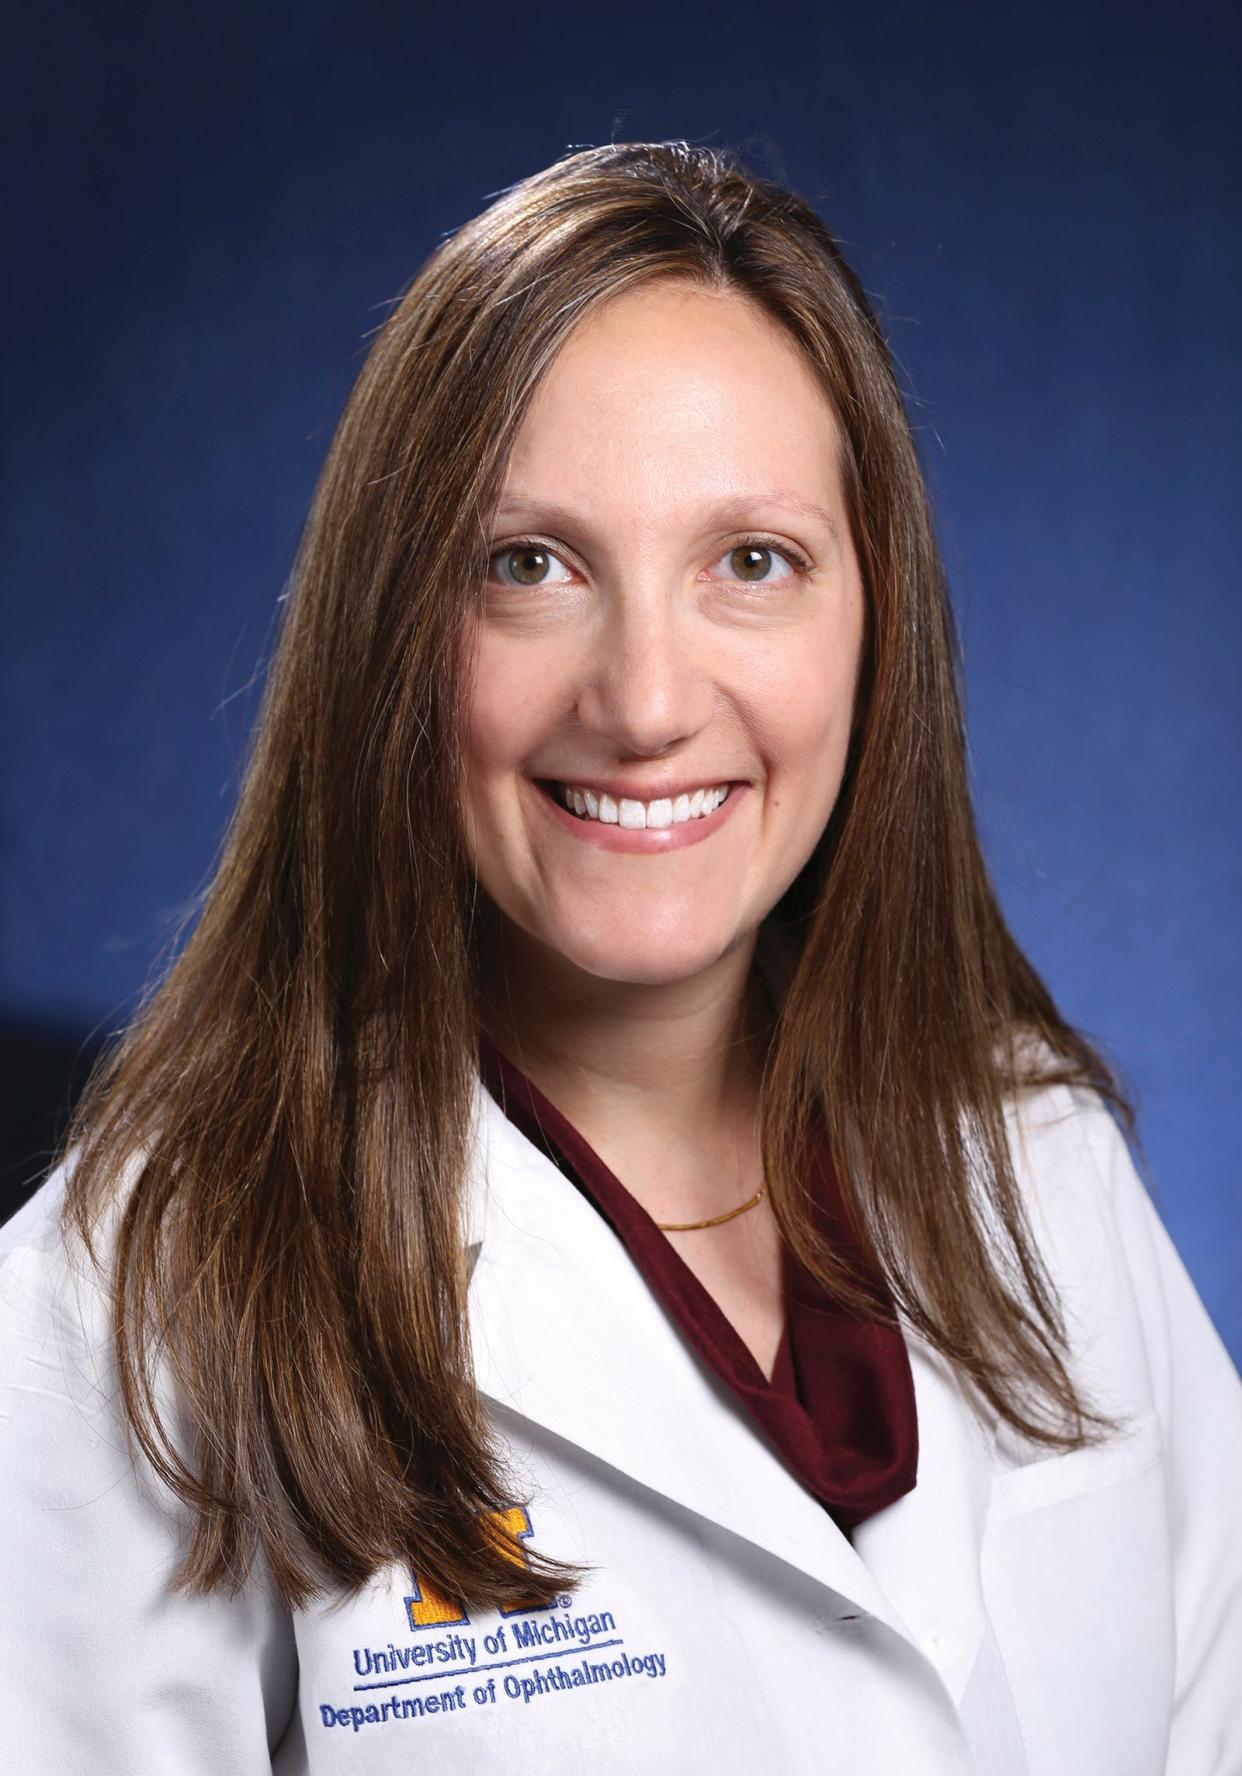 Dr. Julie Rosenthal, a clinical assistant professor of ophthalmology and visual sciences at the University of Michigan and retina specialist at the Kellogg Eye Center at the University of Michigan Health.